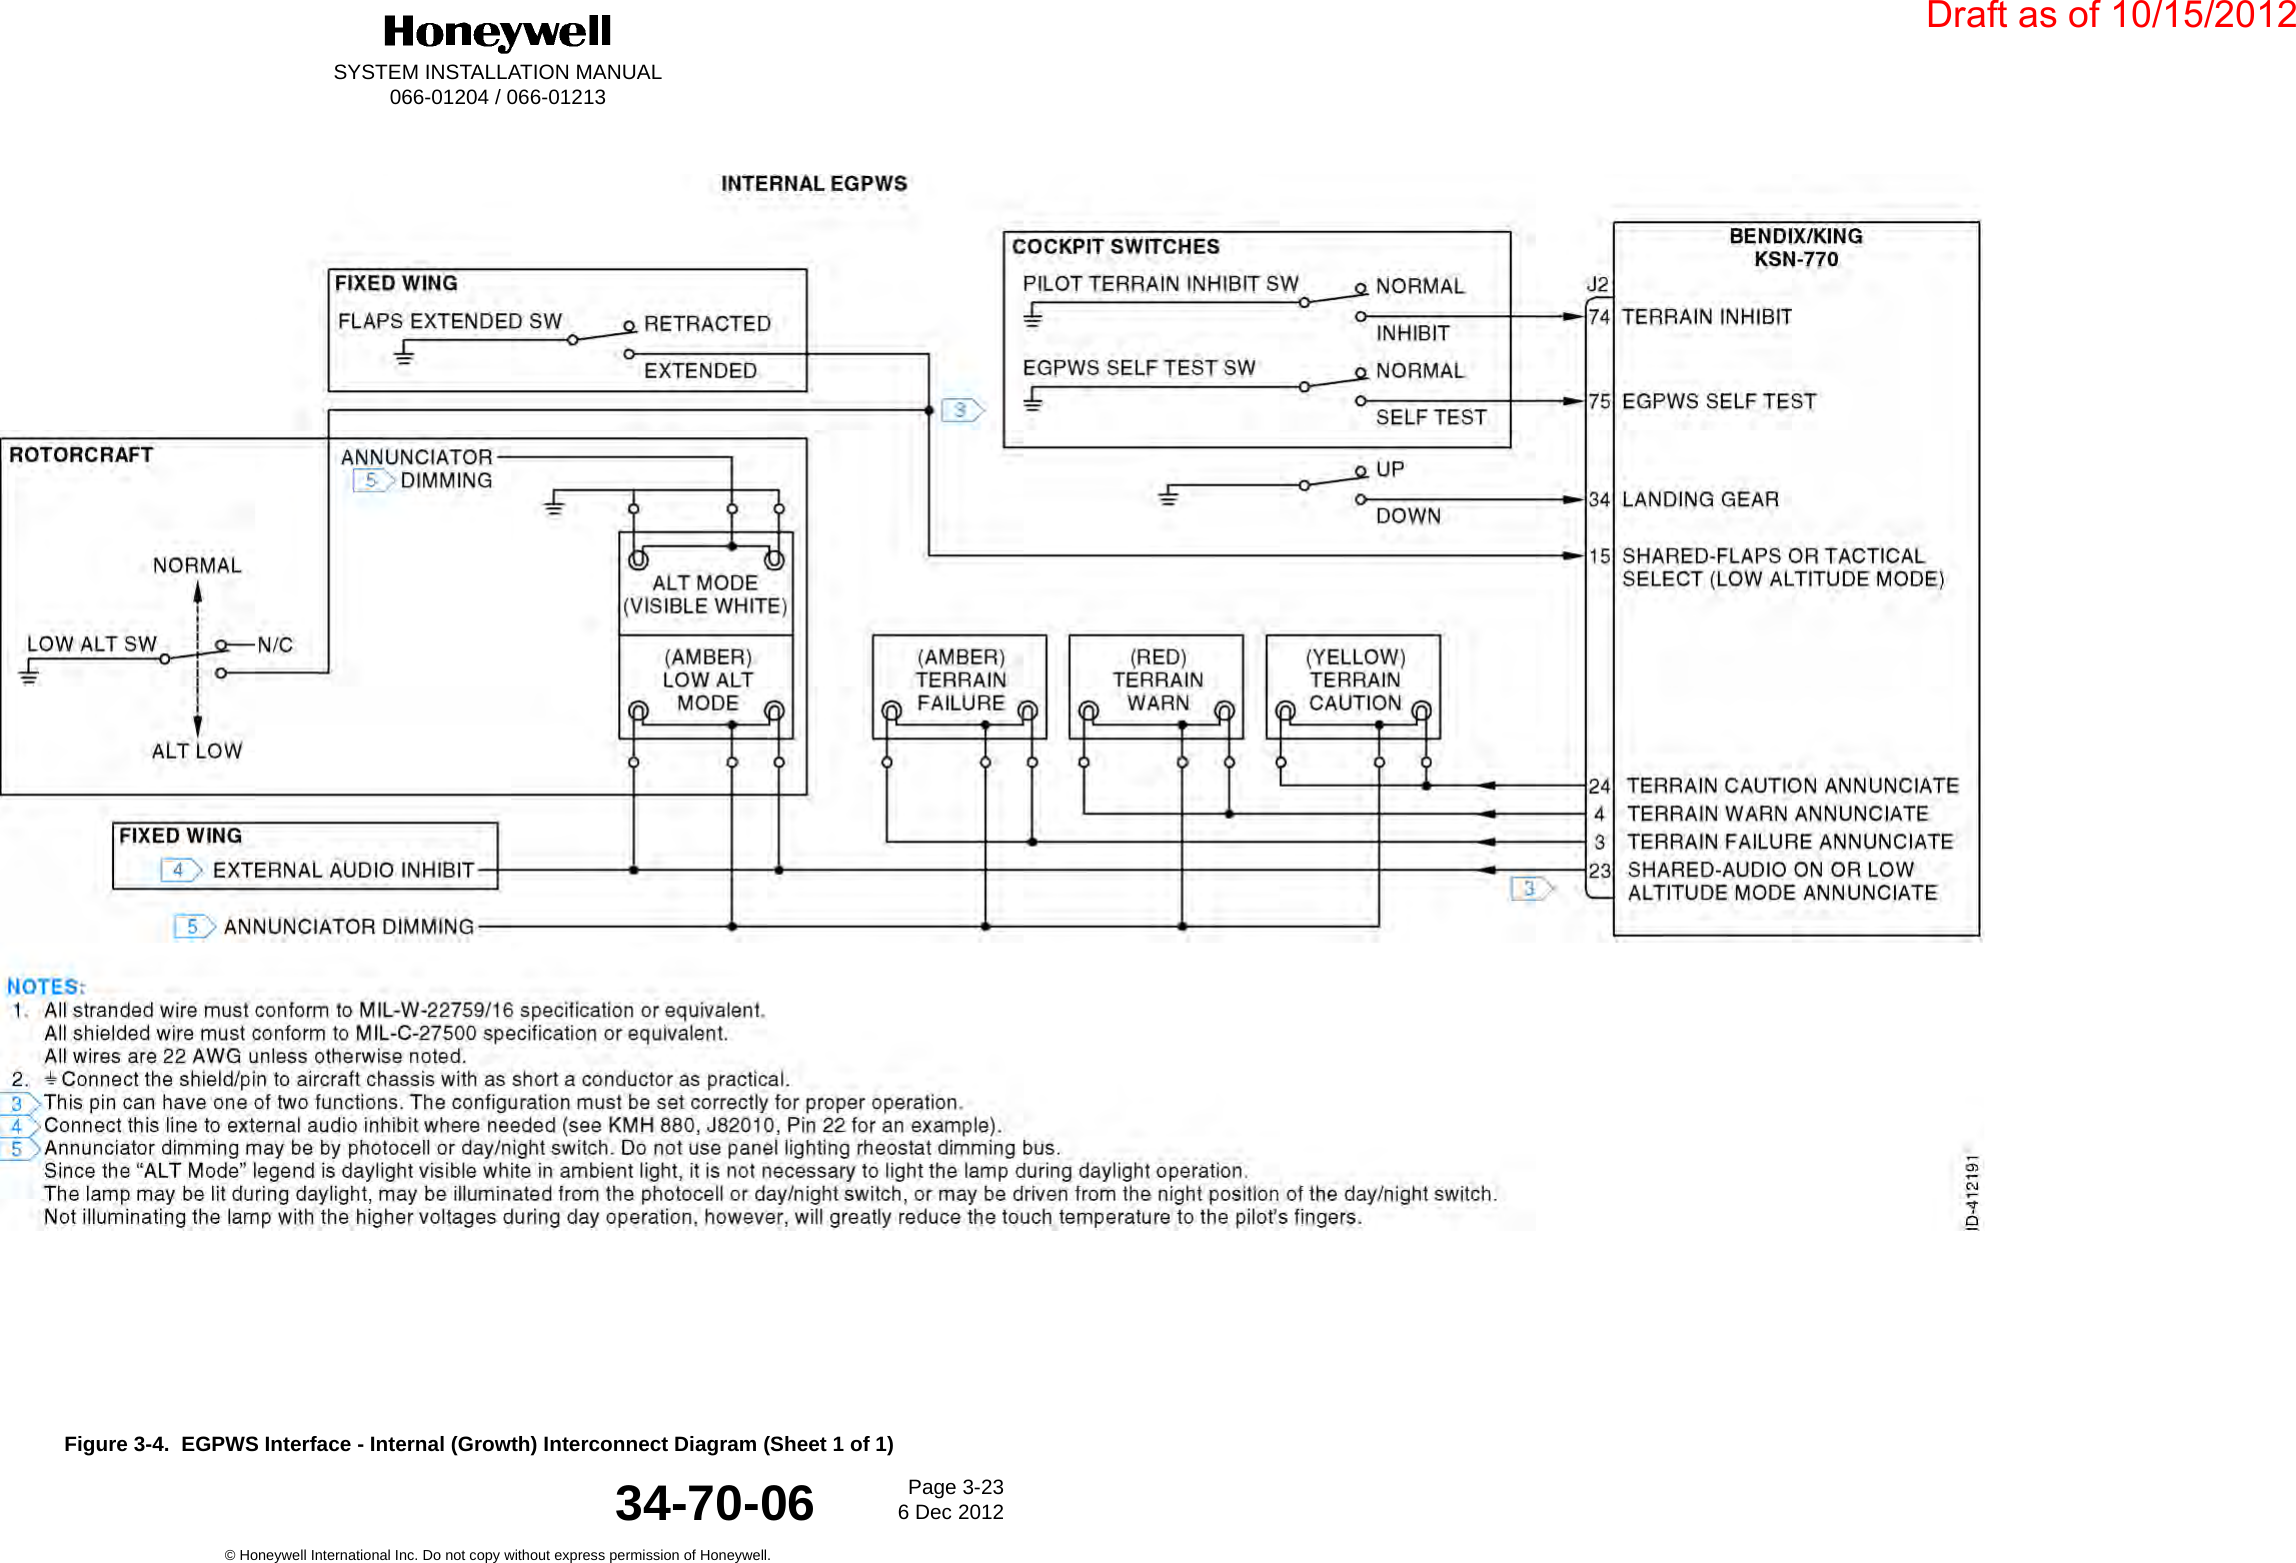 DraftSYSTEM INSTALLATION MANUAL066-01204 / 066-01213Page 3-236 Dec 2012© Honeywell International Inc. Do not copy without express permission of Honeywell.34-70-06Figure 3-4.  EGPWS Interface - Internal (Growth) Interconnect Diagram (Sheet 1 of 1)Draft as of 10/15/2012